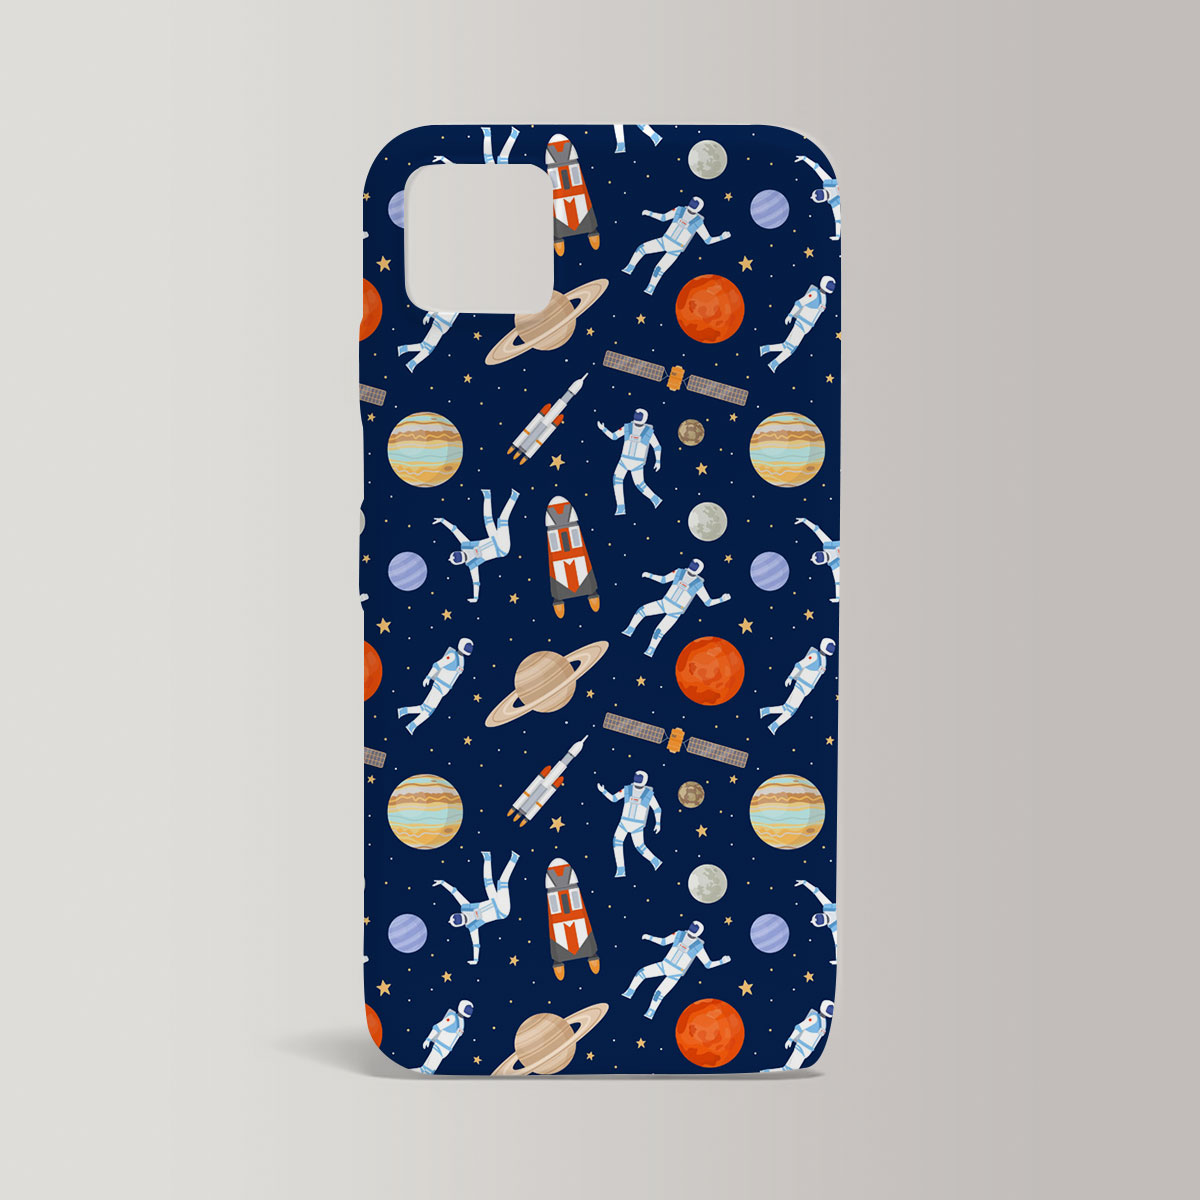 Outer Space Astronaut Iphone Case